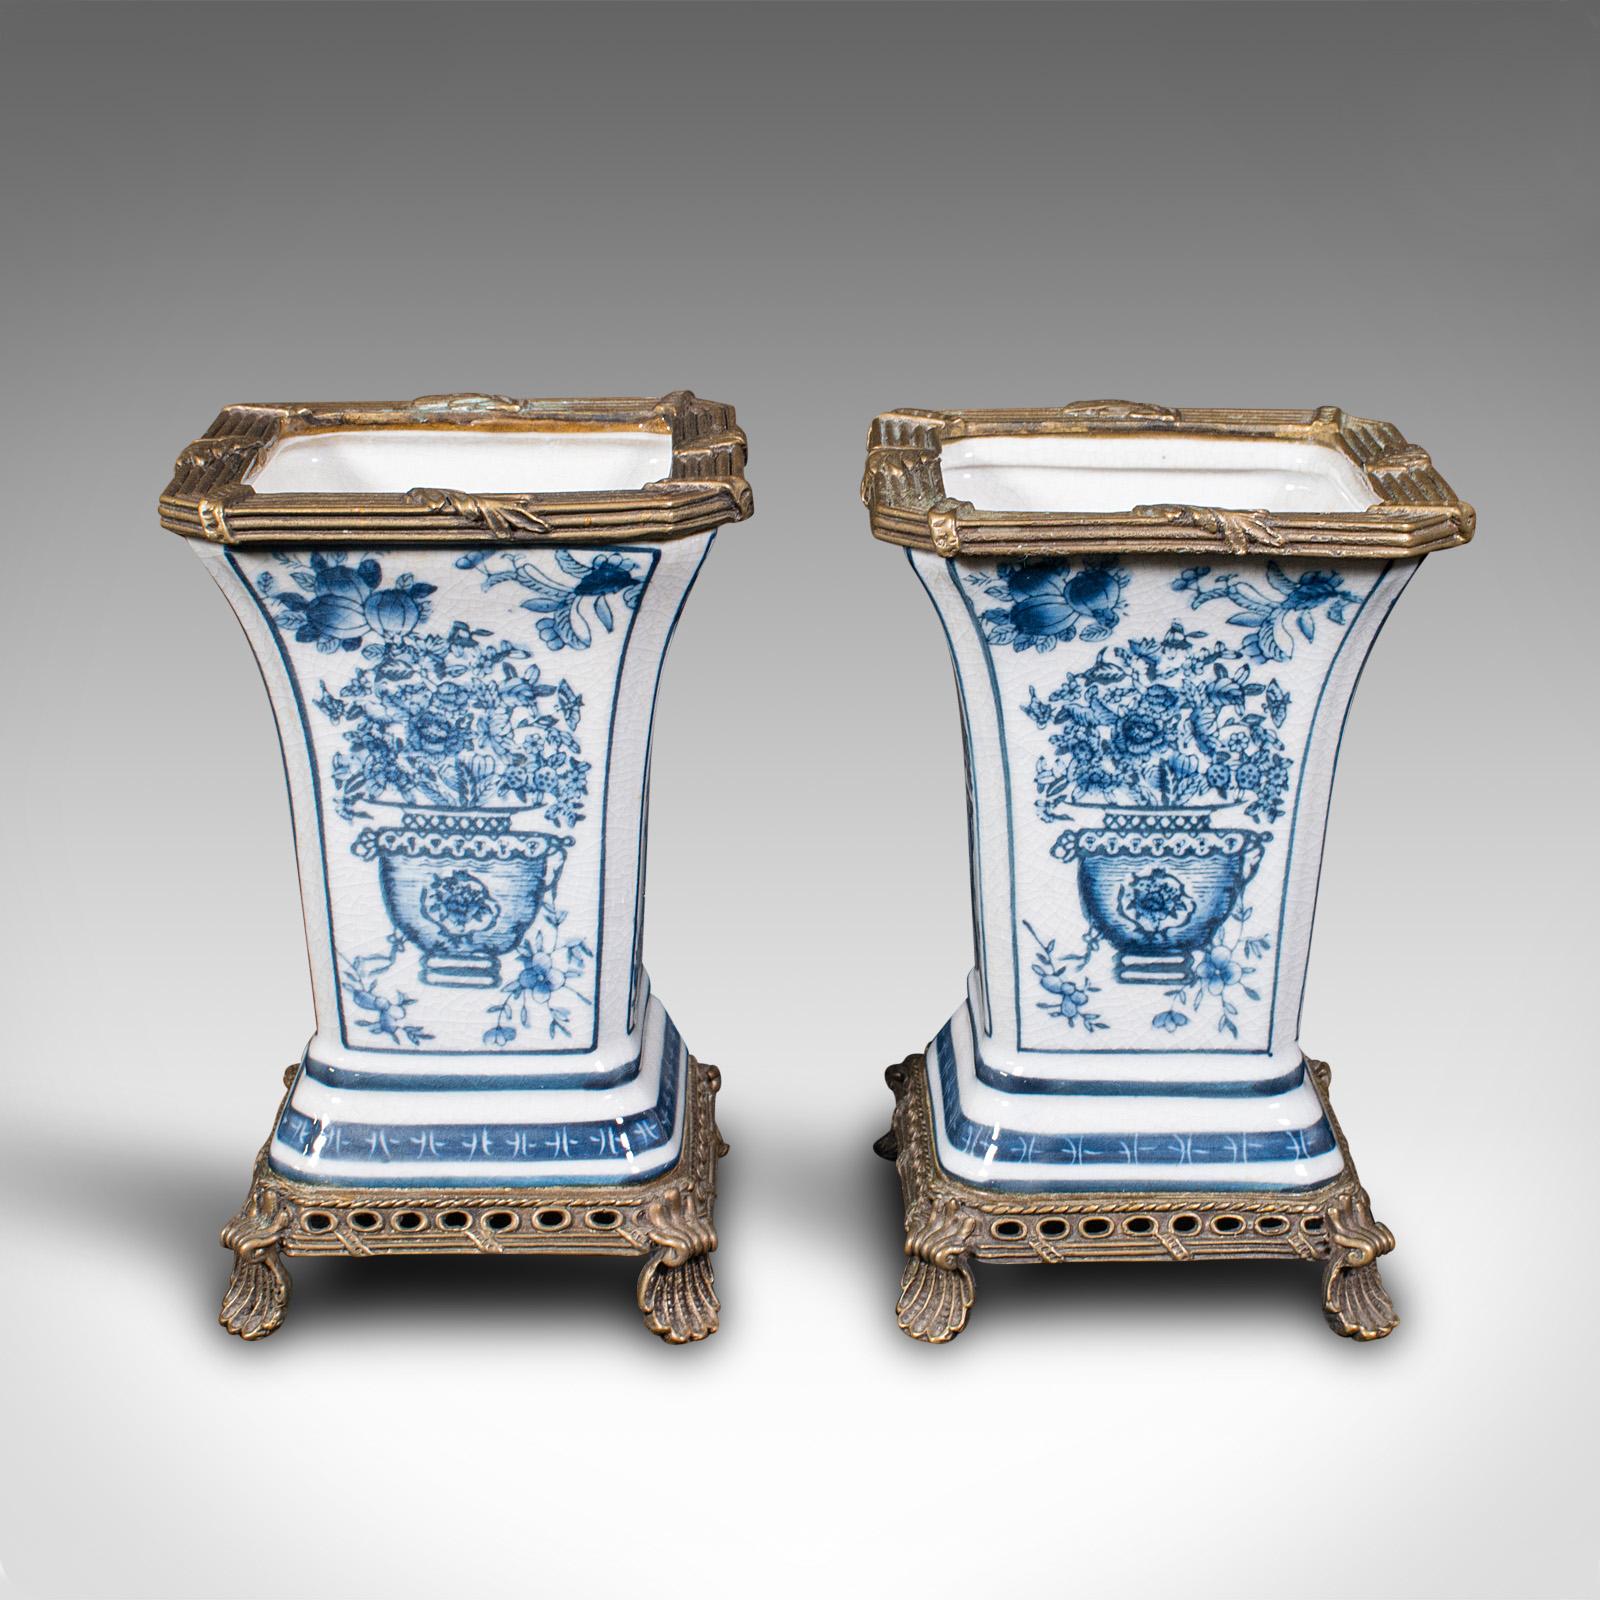 This is a pair of antique flower vases. A Continental, ceramic and gilt metal decorative vase, dating to the late Victorian period, circa 1900.

Appealing blue and white vases with classical decor
Displaying a desirable aged patina throughout
White